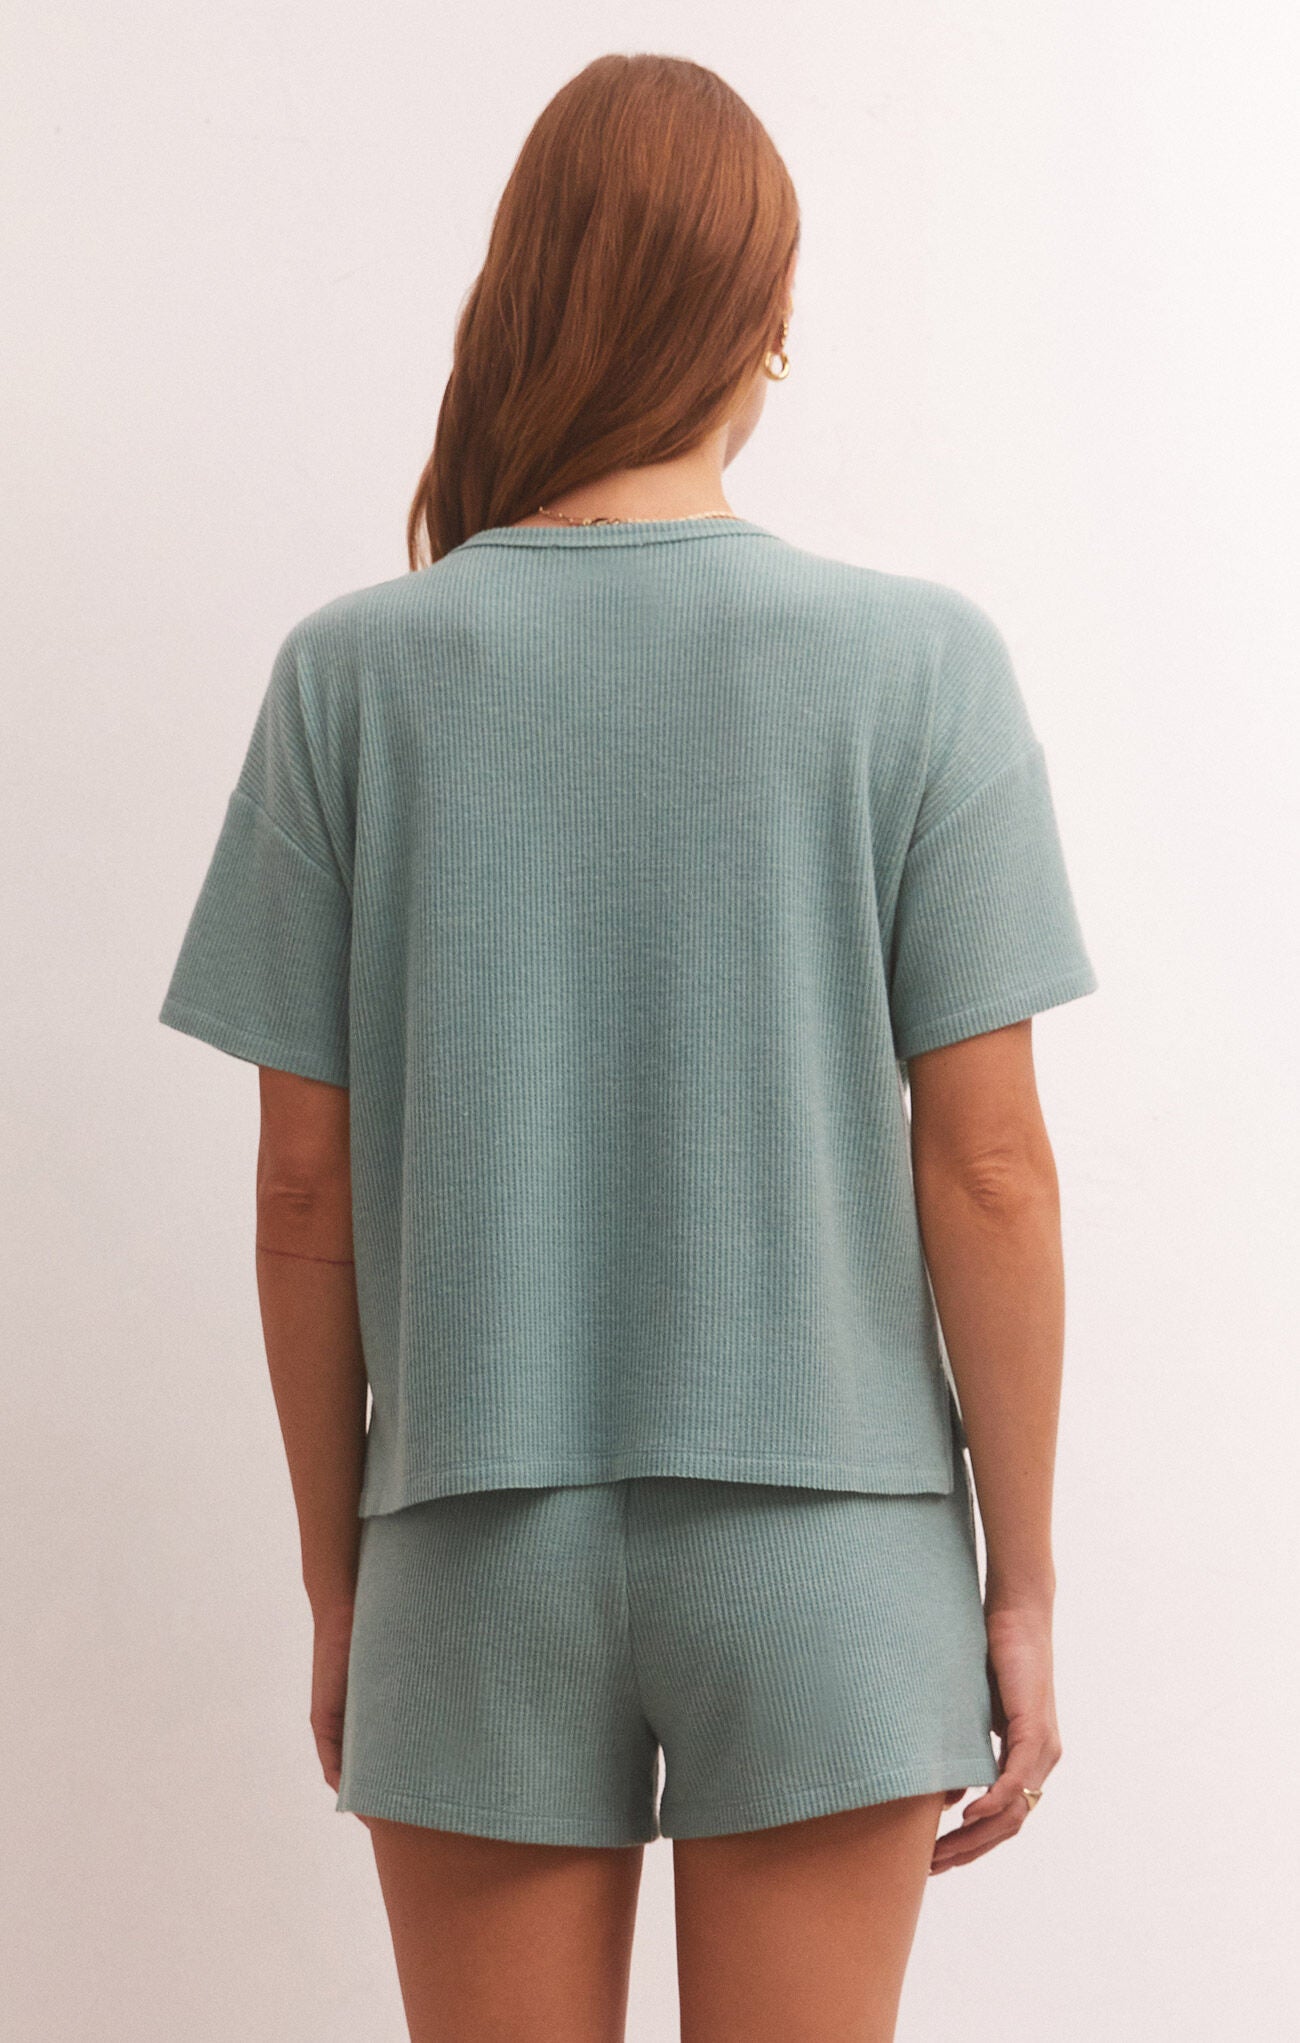 Z SUPPLY COZY DAYS THERMAL TEE IN WASHED JADE